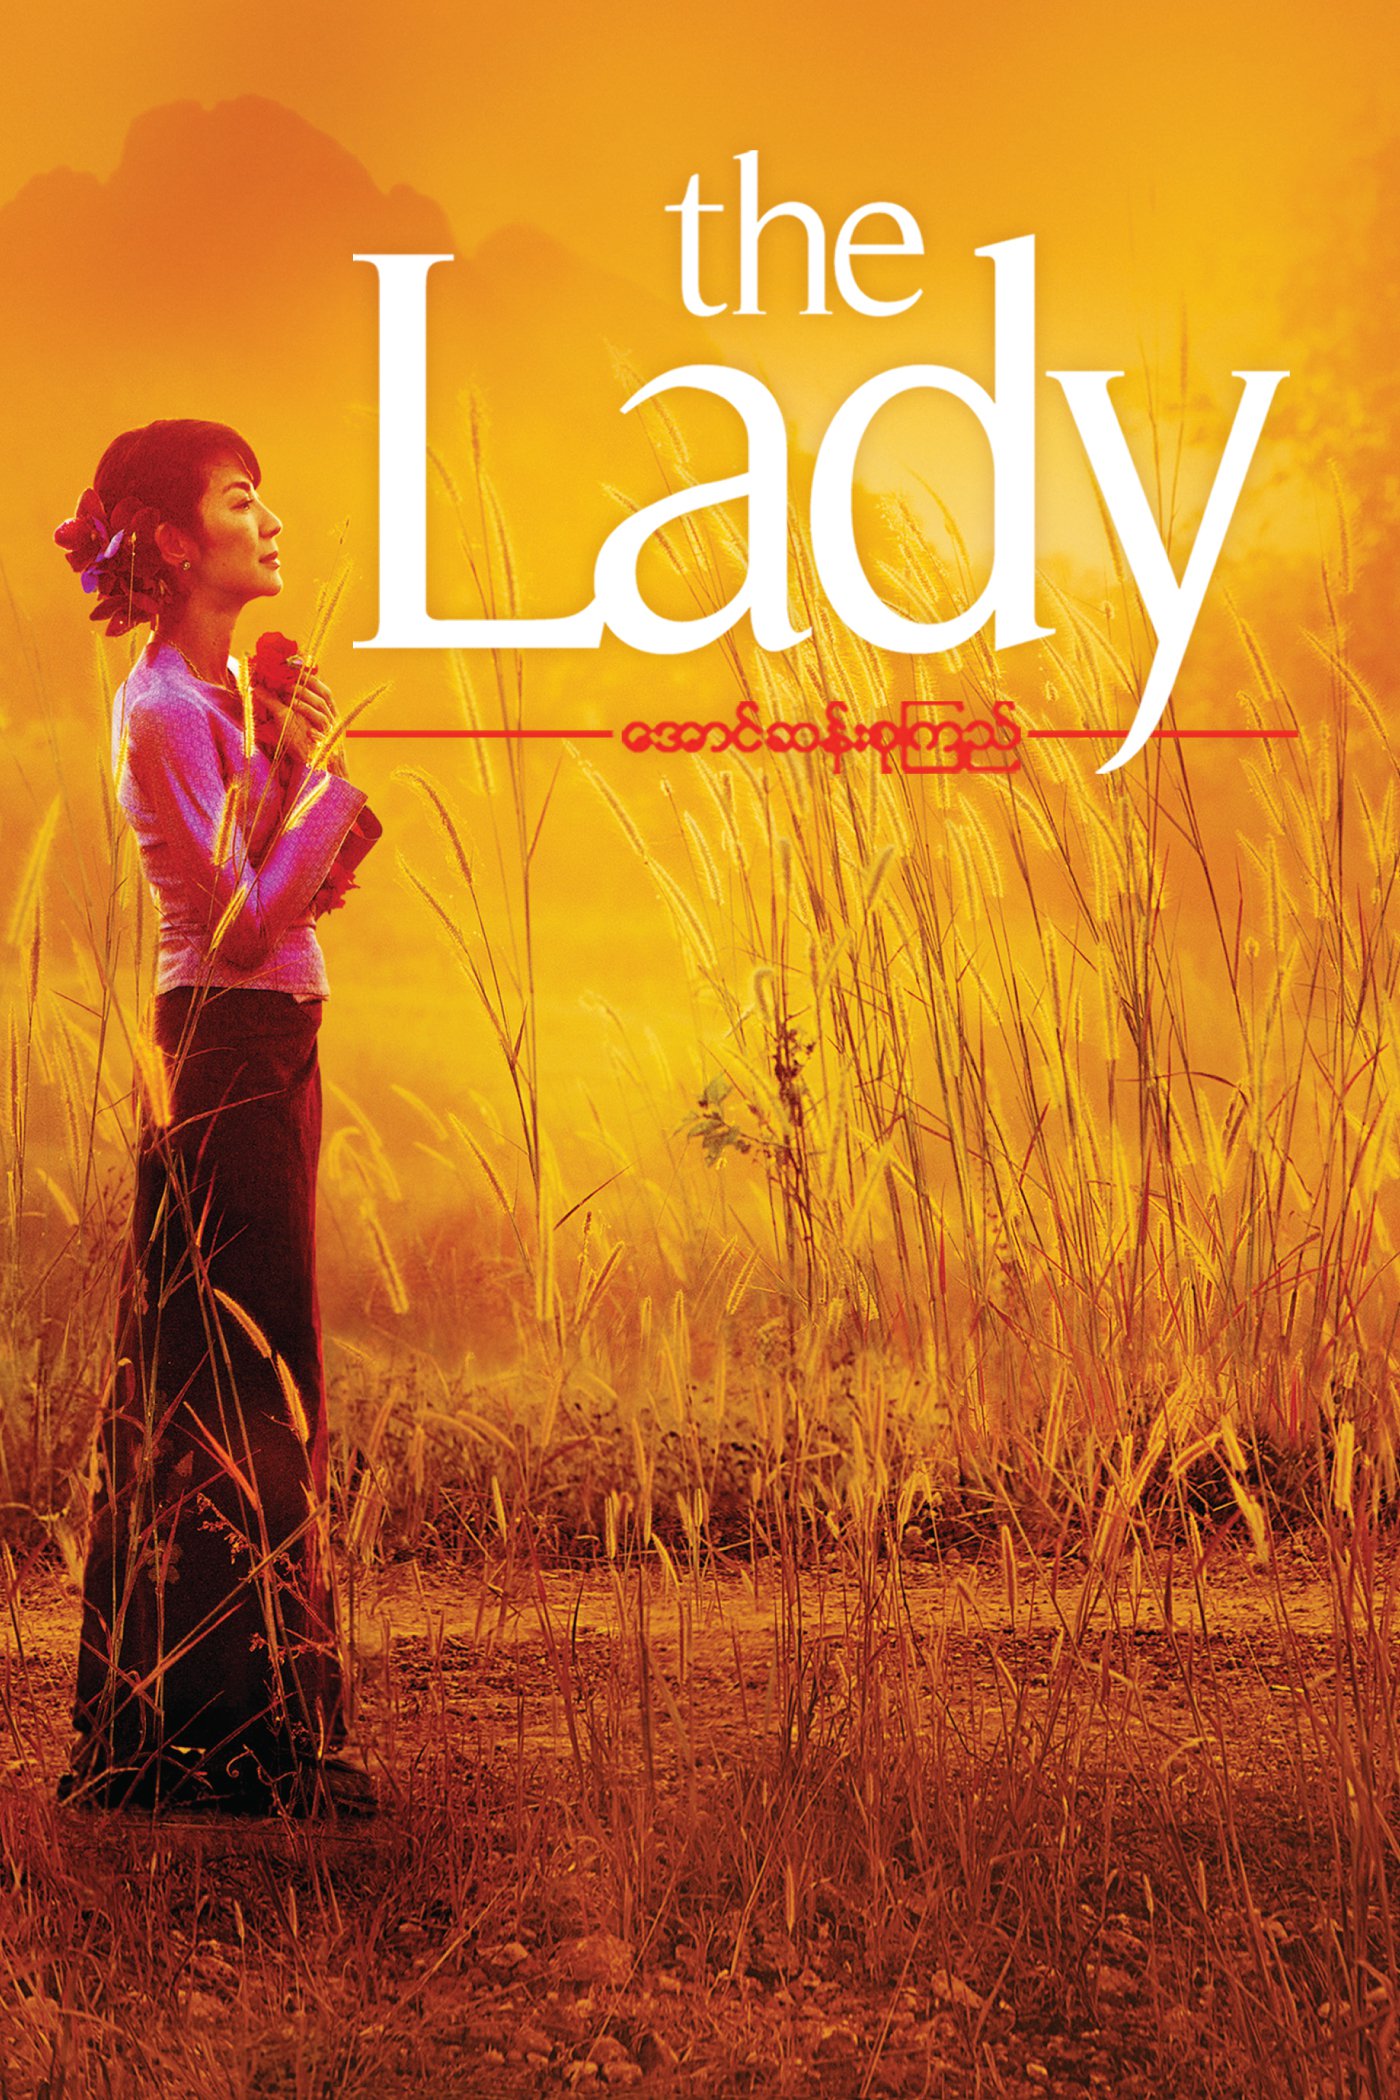 Poster for the movie "The Lady"